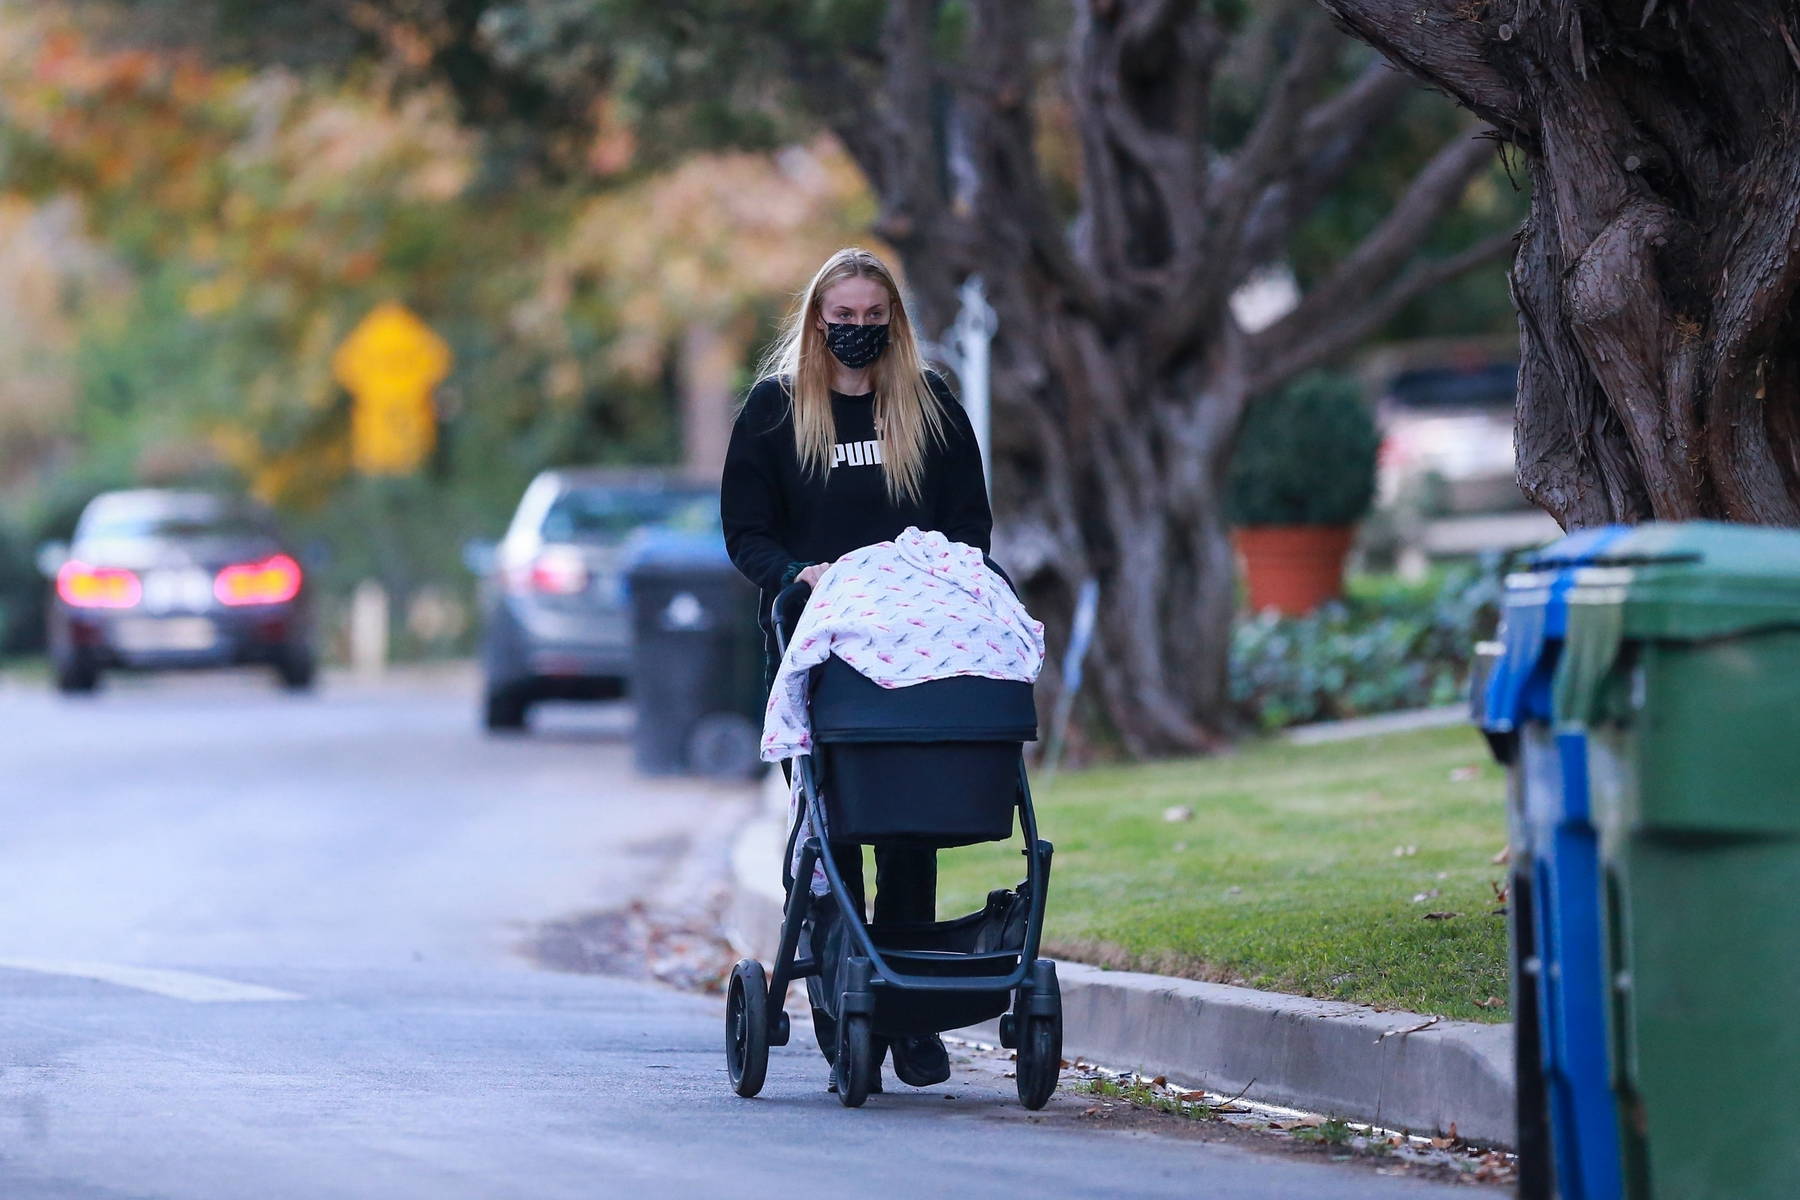 Sophie Turner takes her baby girl Willa out for an afternoon walk near her  home in